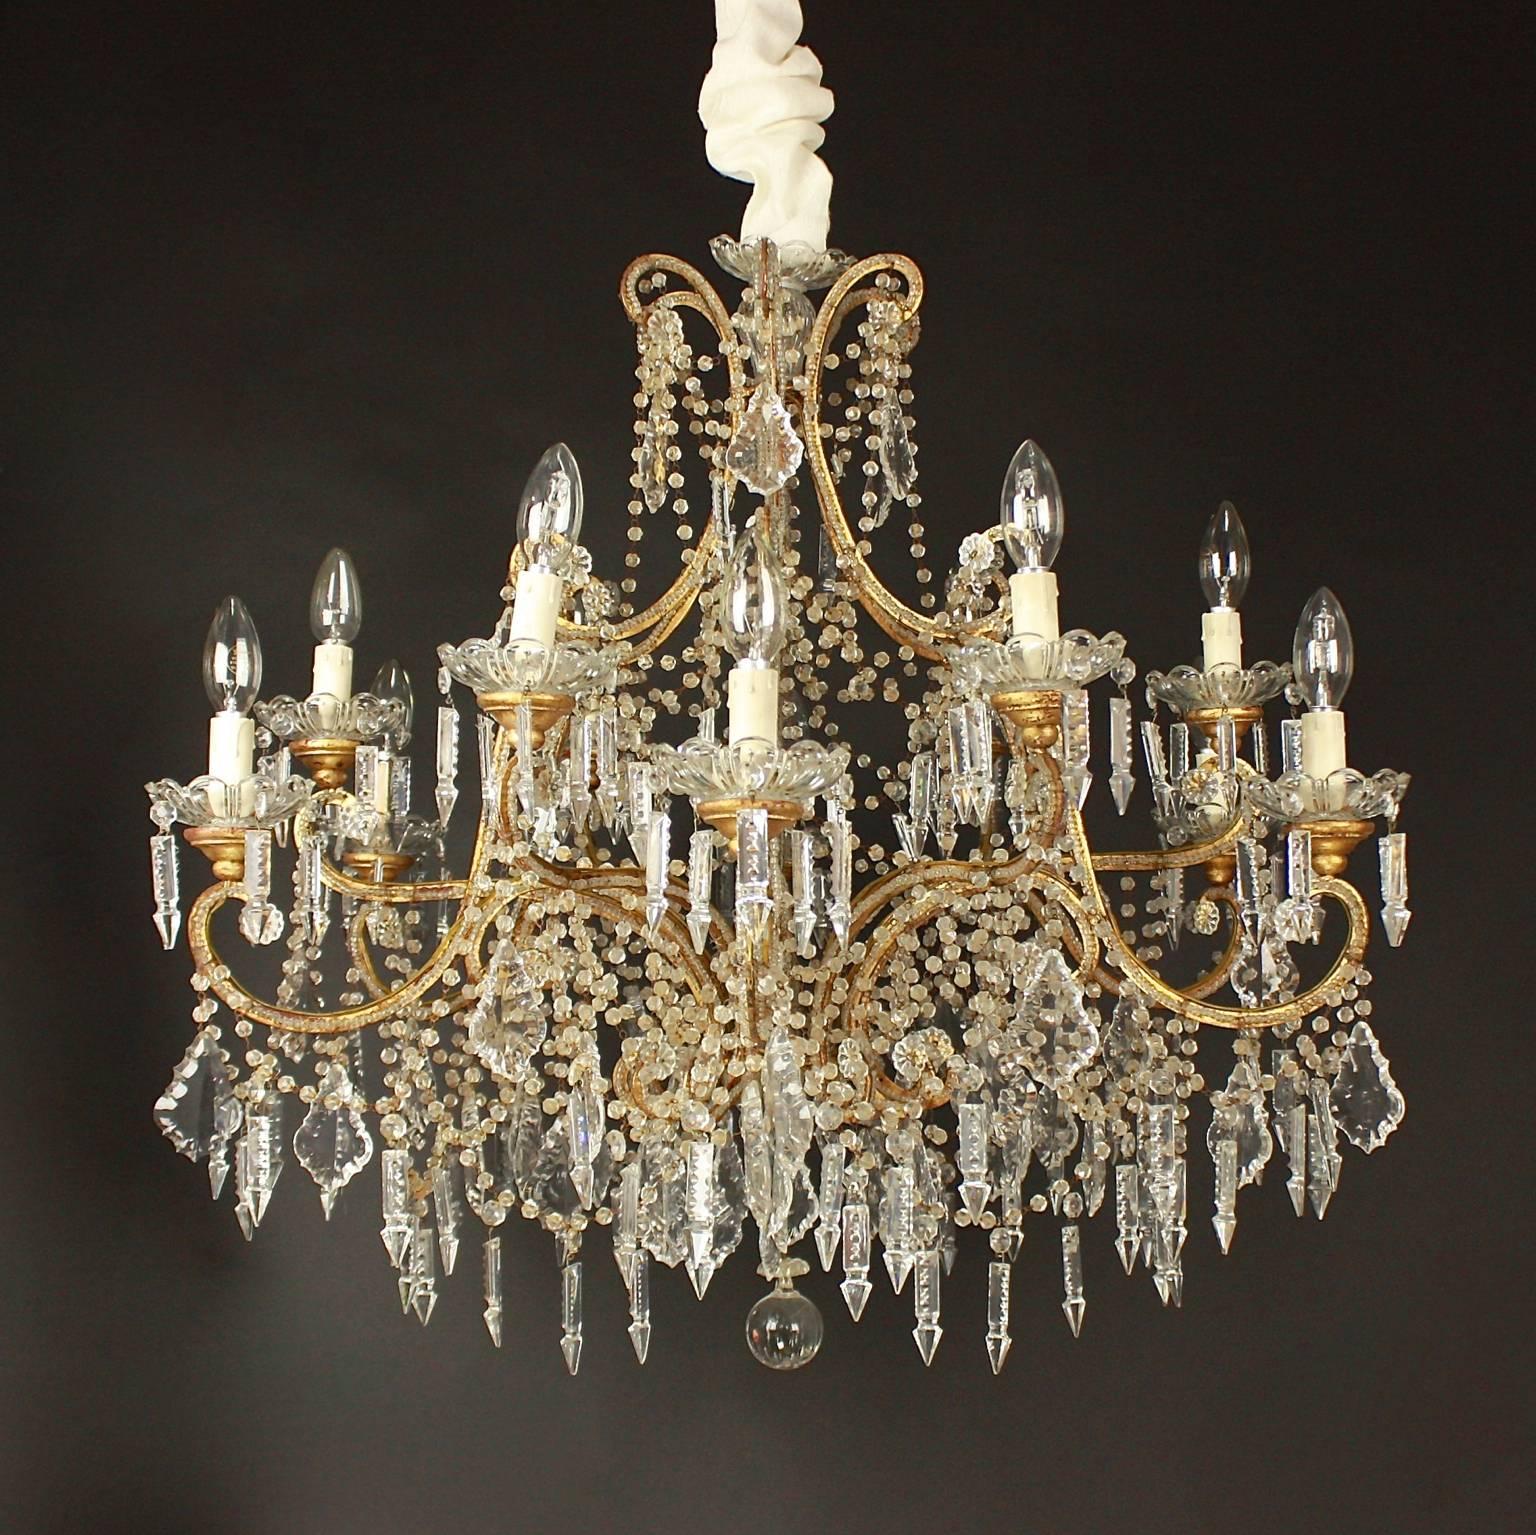 A Italian crystal cut twelve-light chandelier from the region of Nice in the South of France. With two tiers, each issuing six gilt-bronze beaded arms with fine bobeches hang with icicle crystals. The arme adorned with pendeloques and icicle